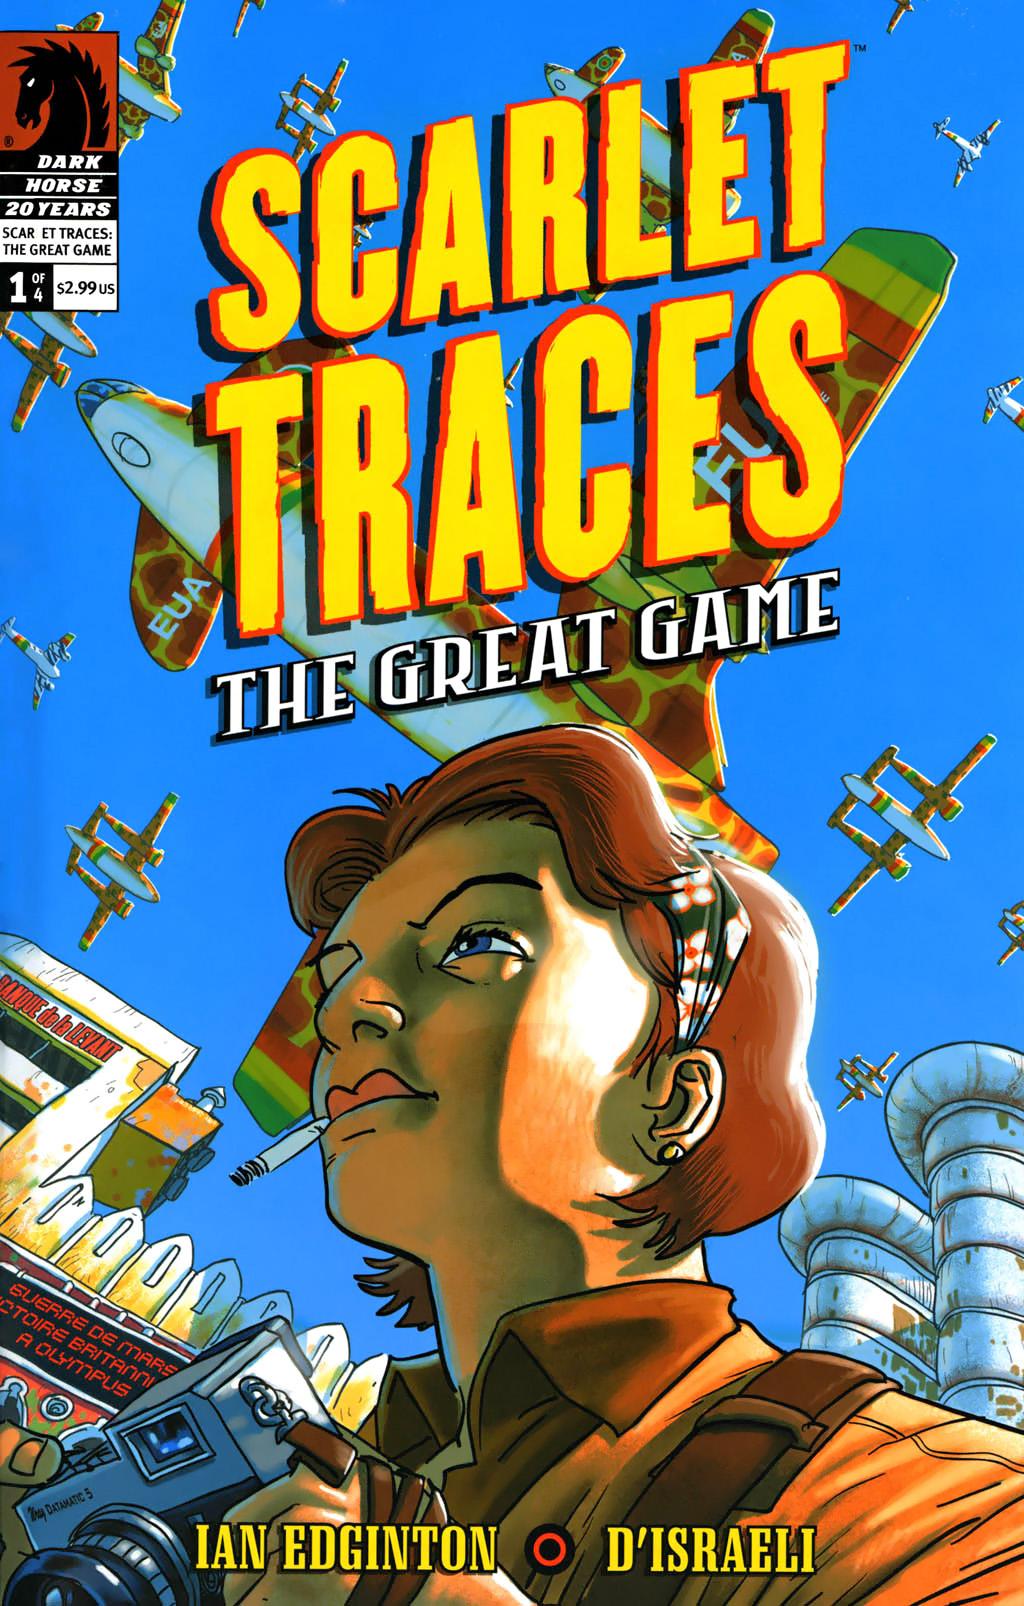 Scarlet Traces: The Great Game Vol. 1 #1